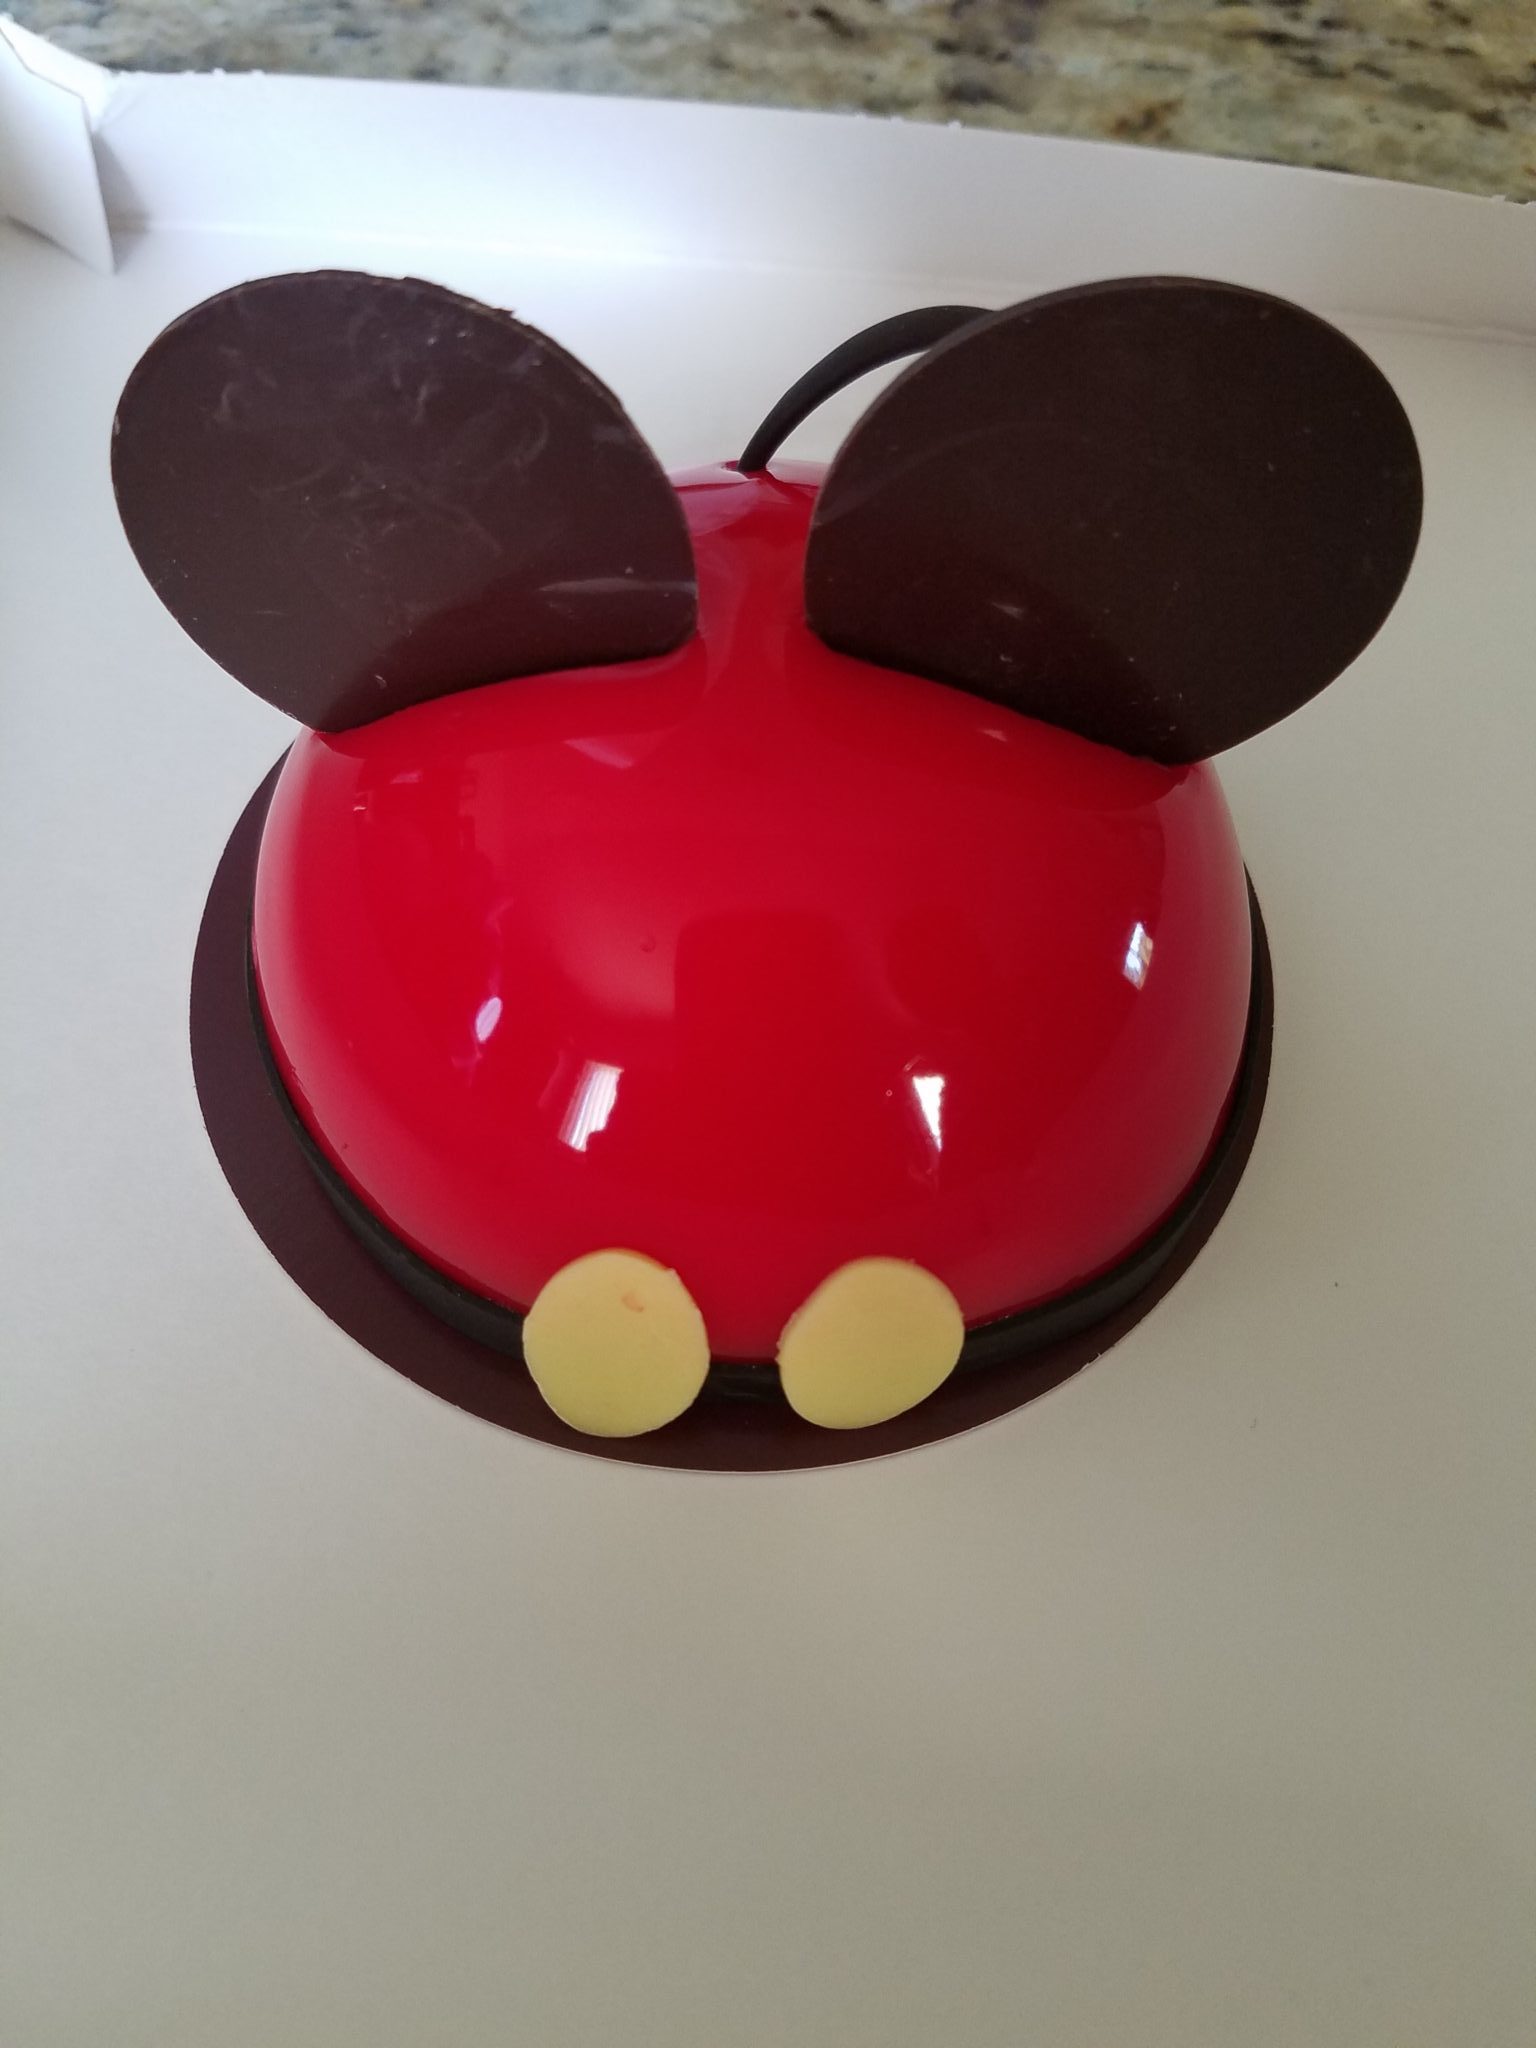 Amorette’s Patisserie Autumn Gingerbread Pumpkin & Mickey Mouse Pastries Review